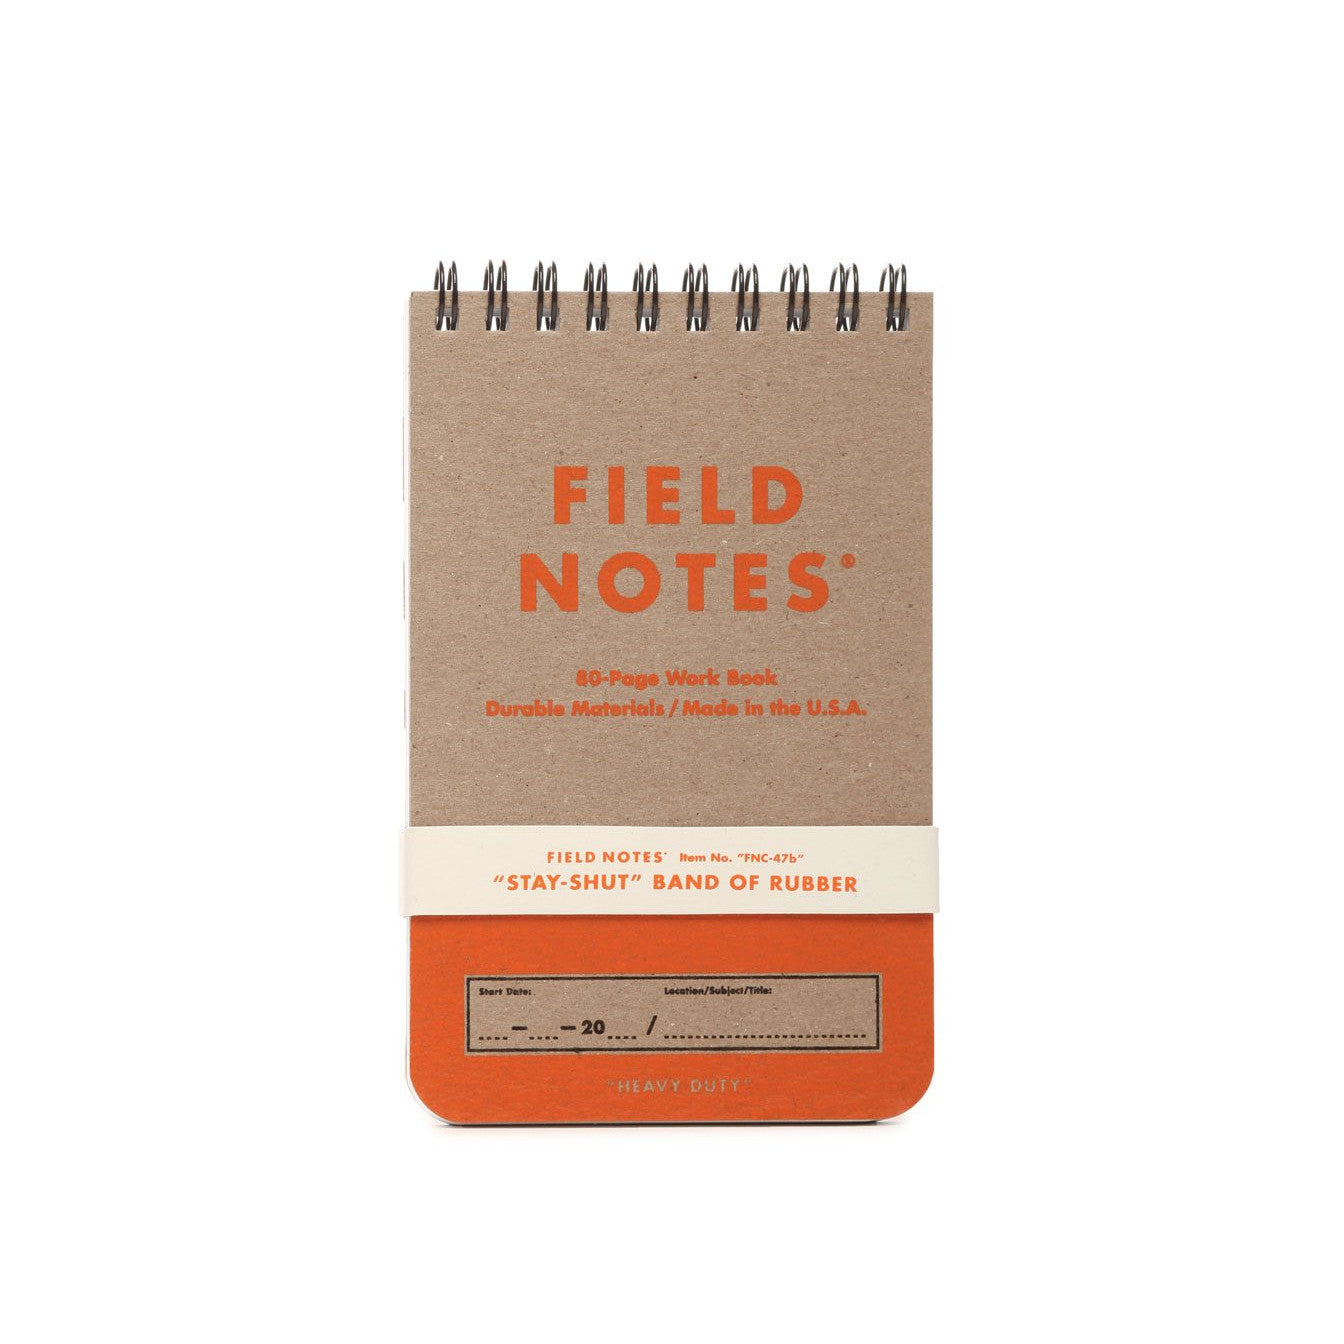 Field Notes Heavy Duty 3½" × 5½" Ruled & Double Graph Grid Paper | Atlas Stationers.